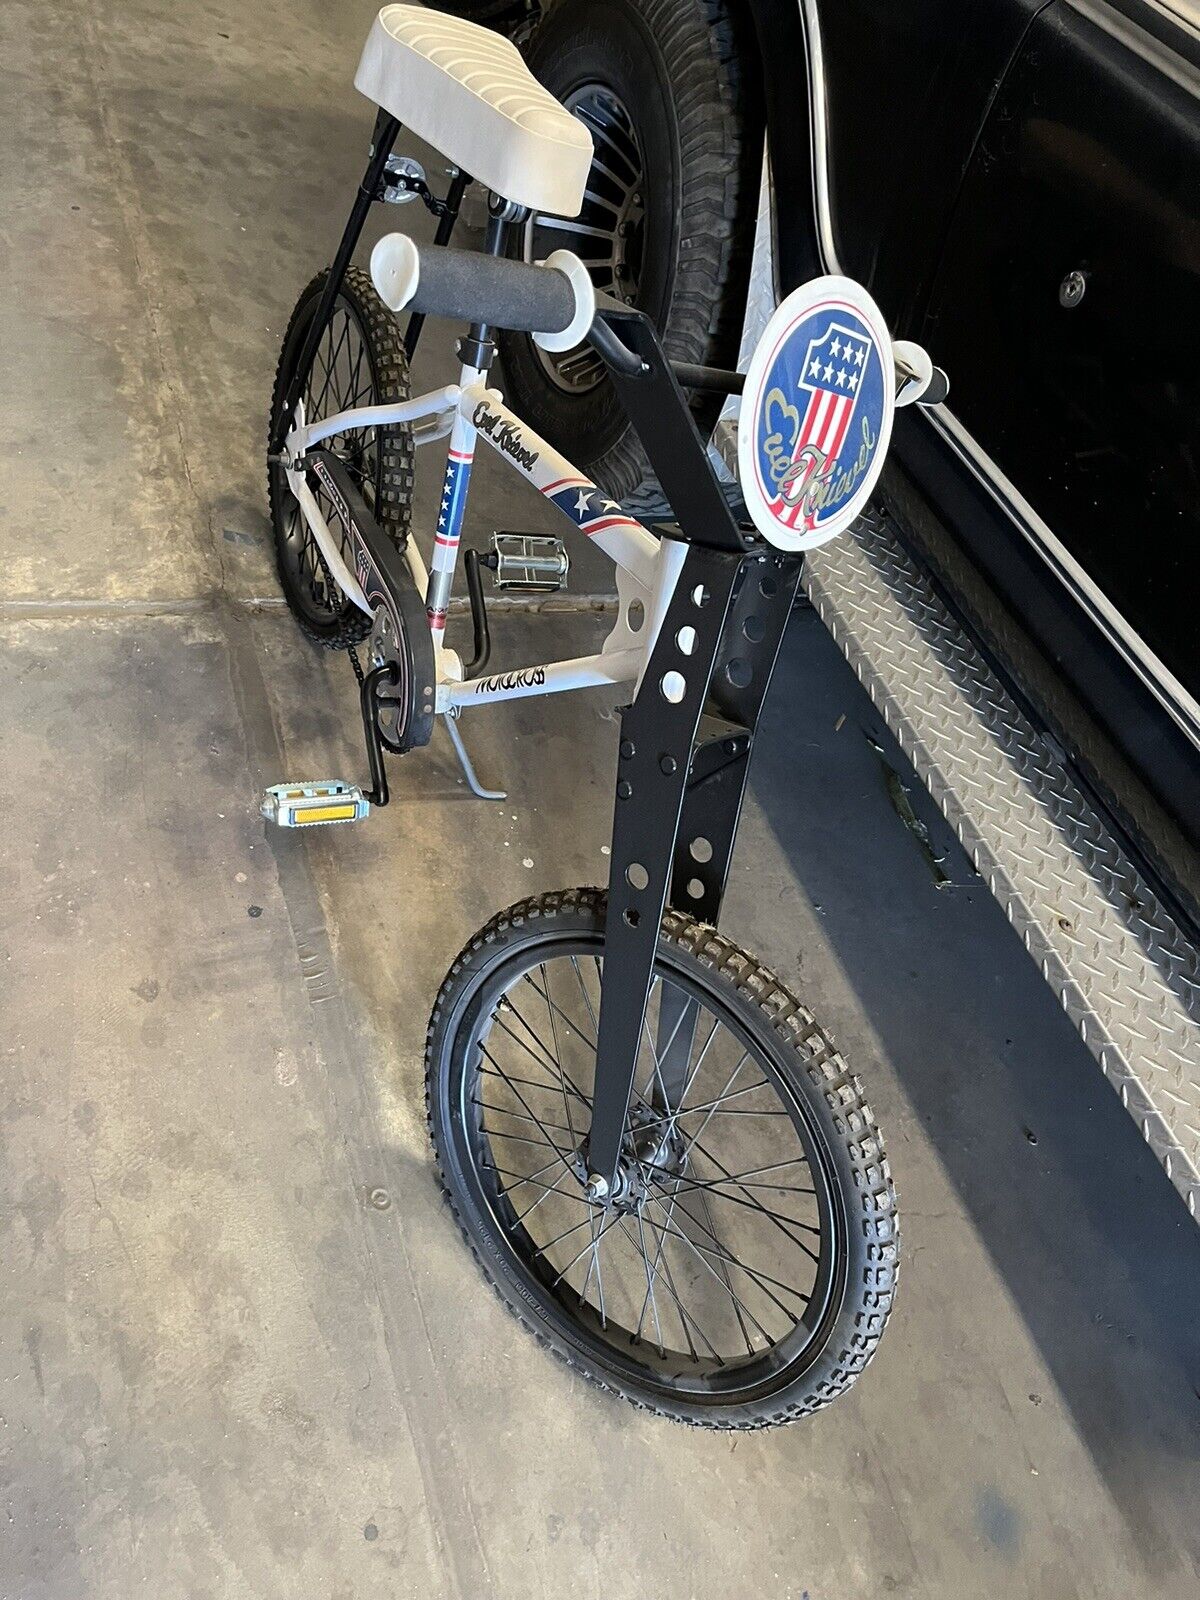 RARE VINTAGE 1970'S AMF EVEL KNIEVEL BMX BIKE BICYCLE VERY COOL